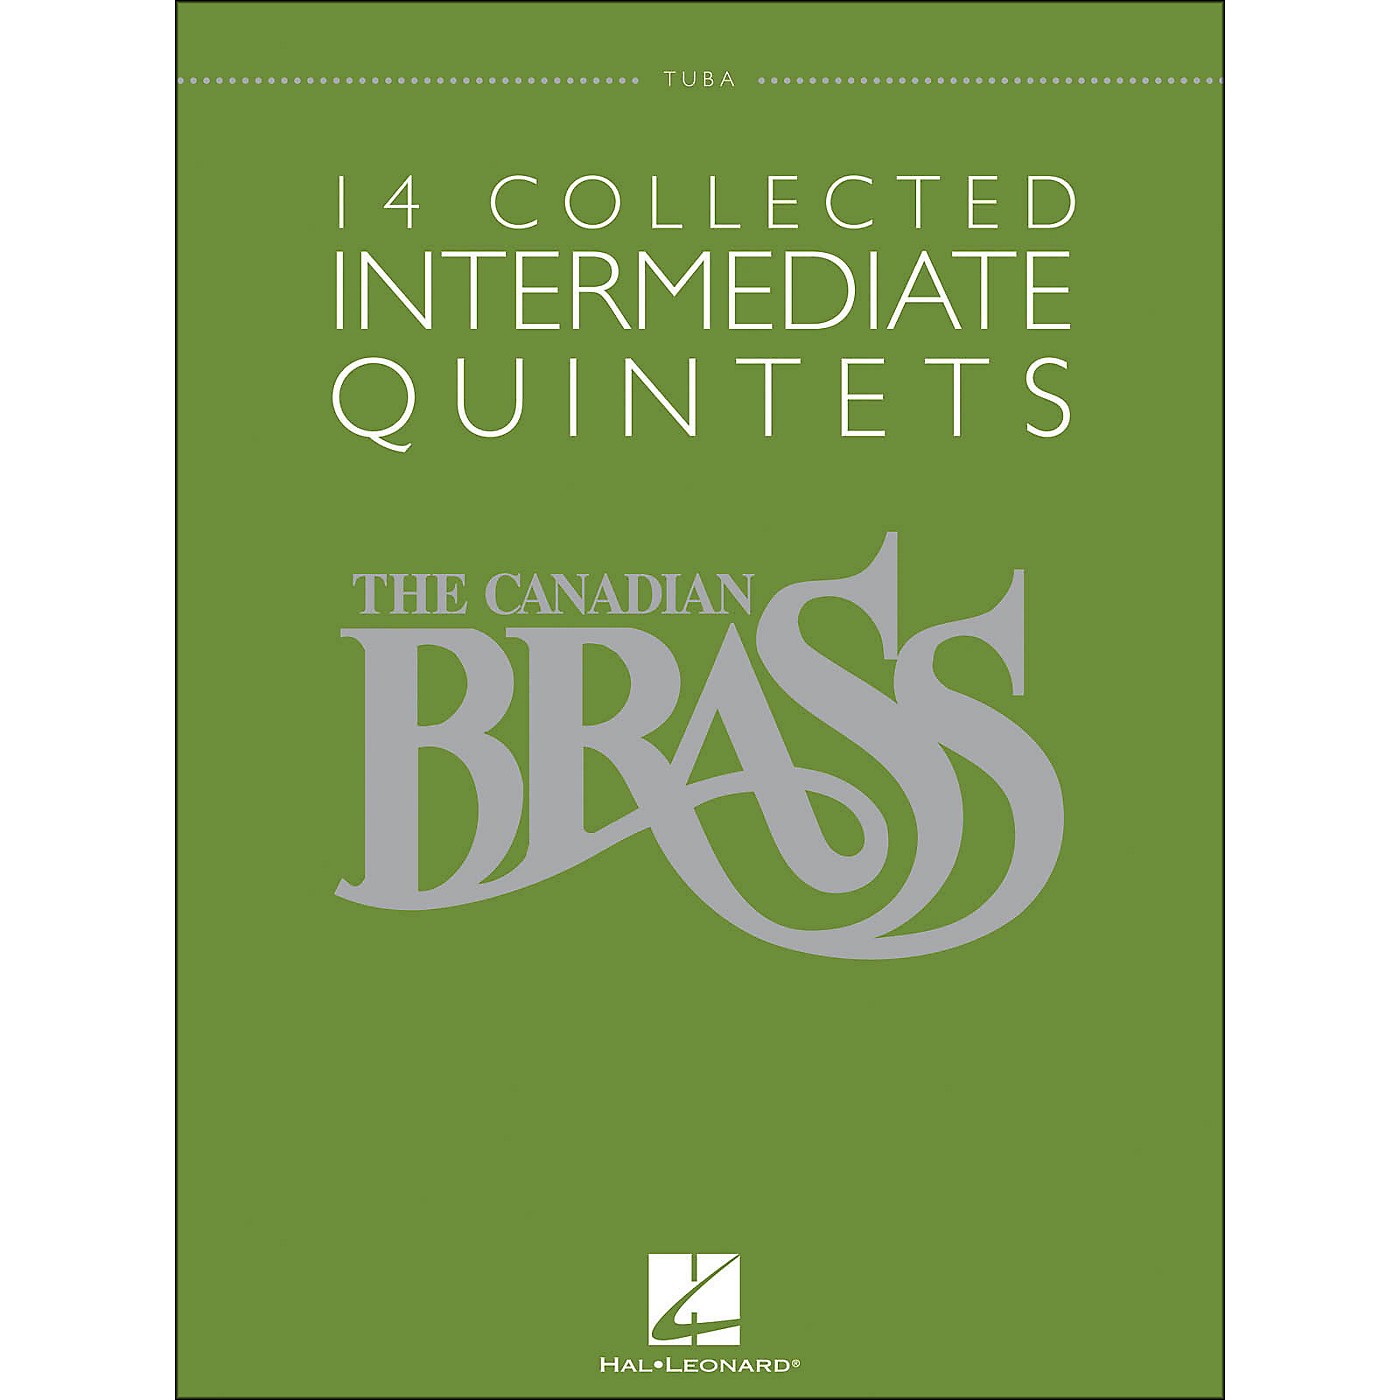 Hal Leonard The Canadian Brass: 14 Collected Intermediate Quintets Songbook - Tuba thumbnail